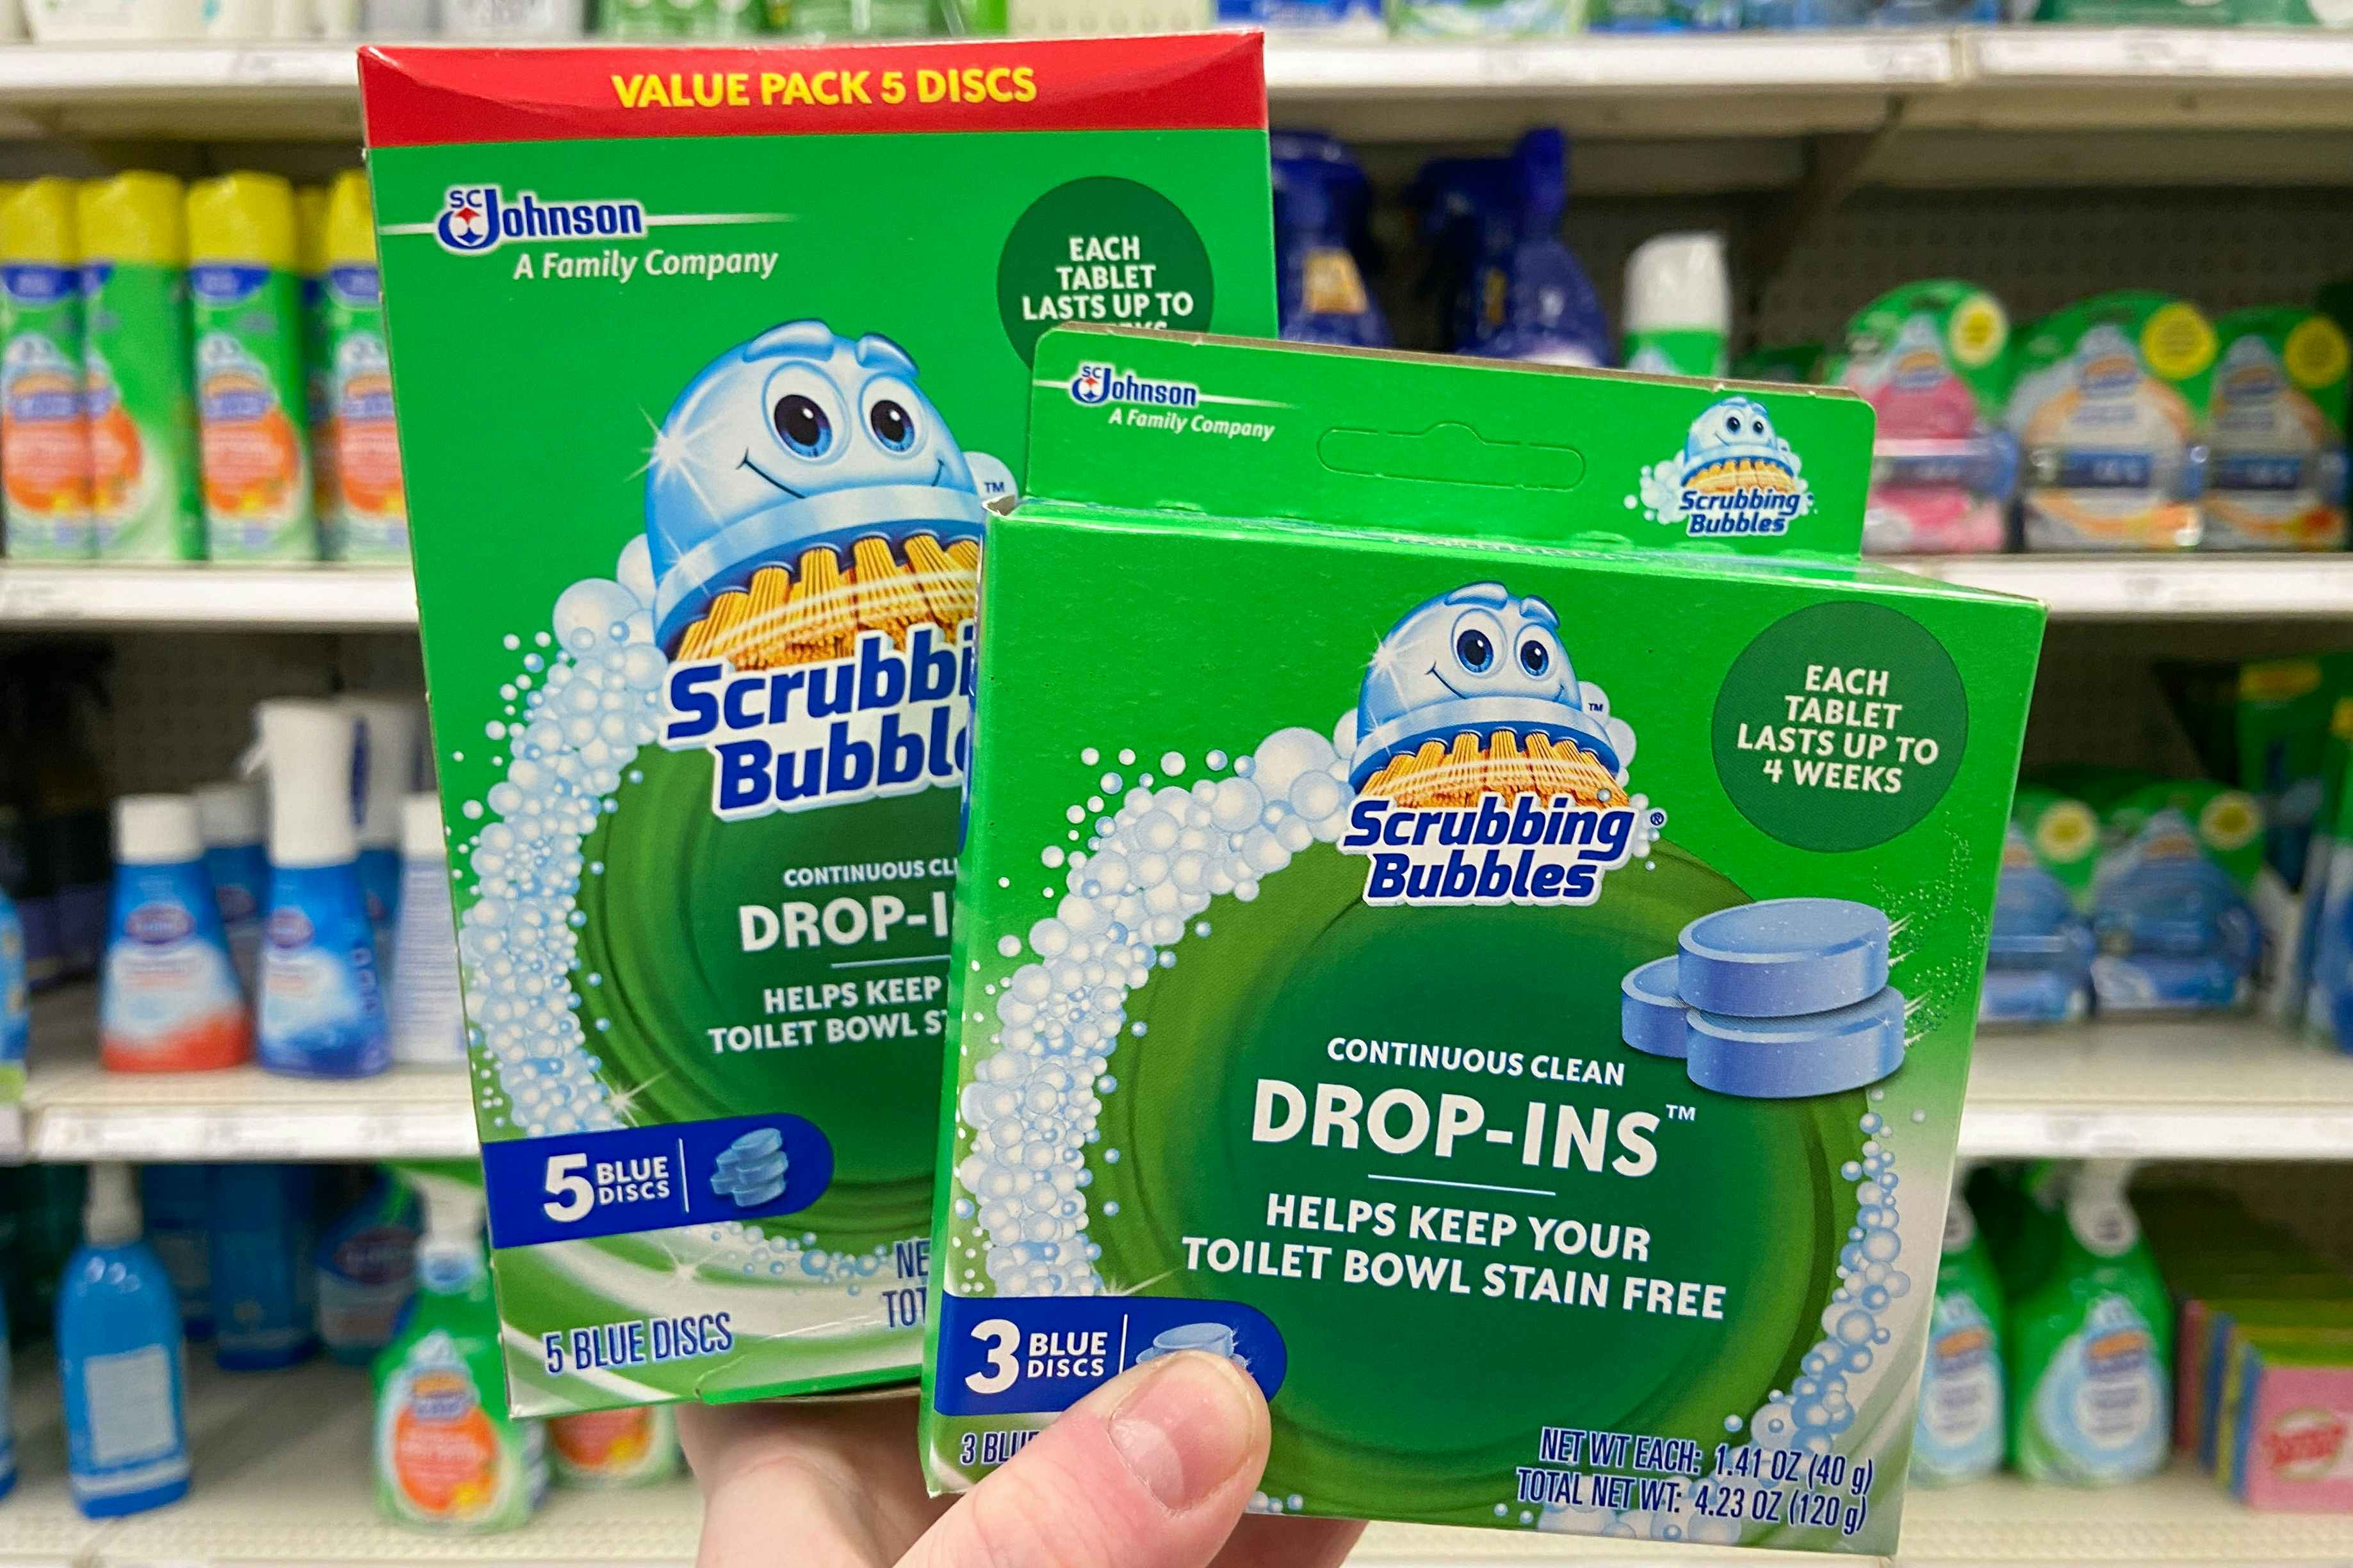 Scrubbing Bubbles Toilet Cleaners on Amazon: $3 Tablet Packs, $2.50 per Spray